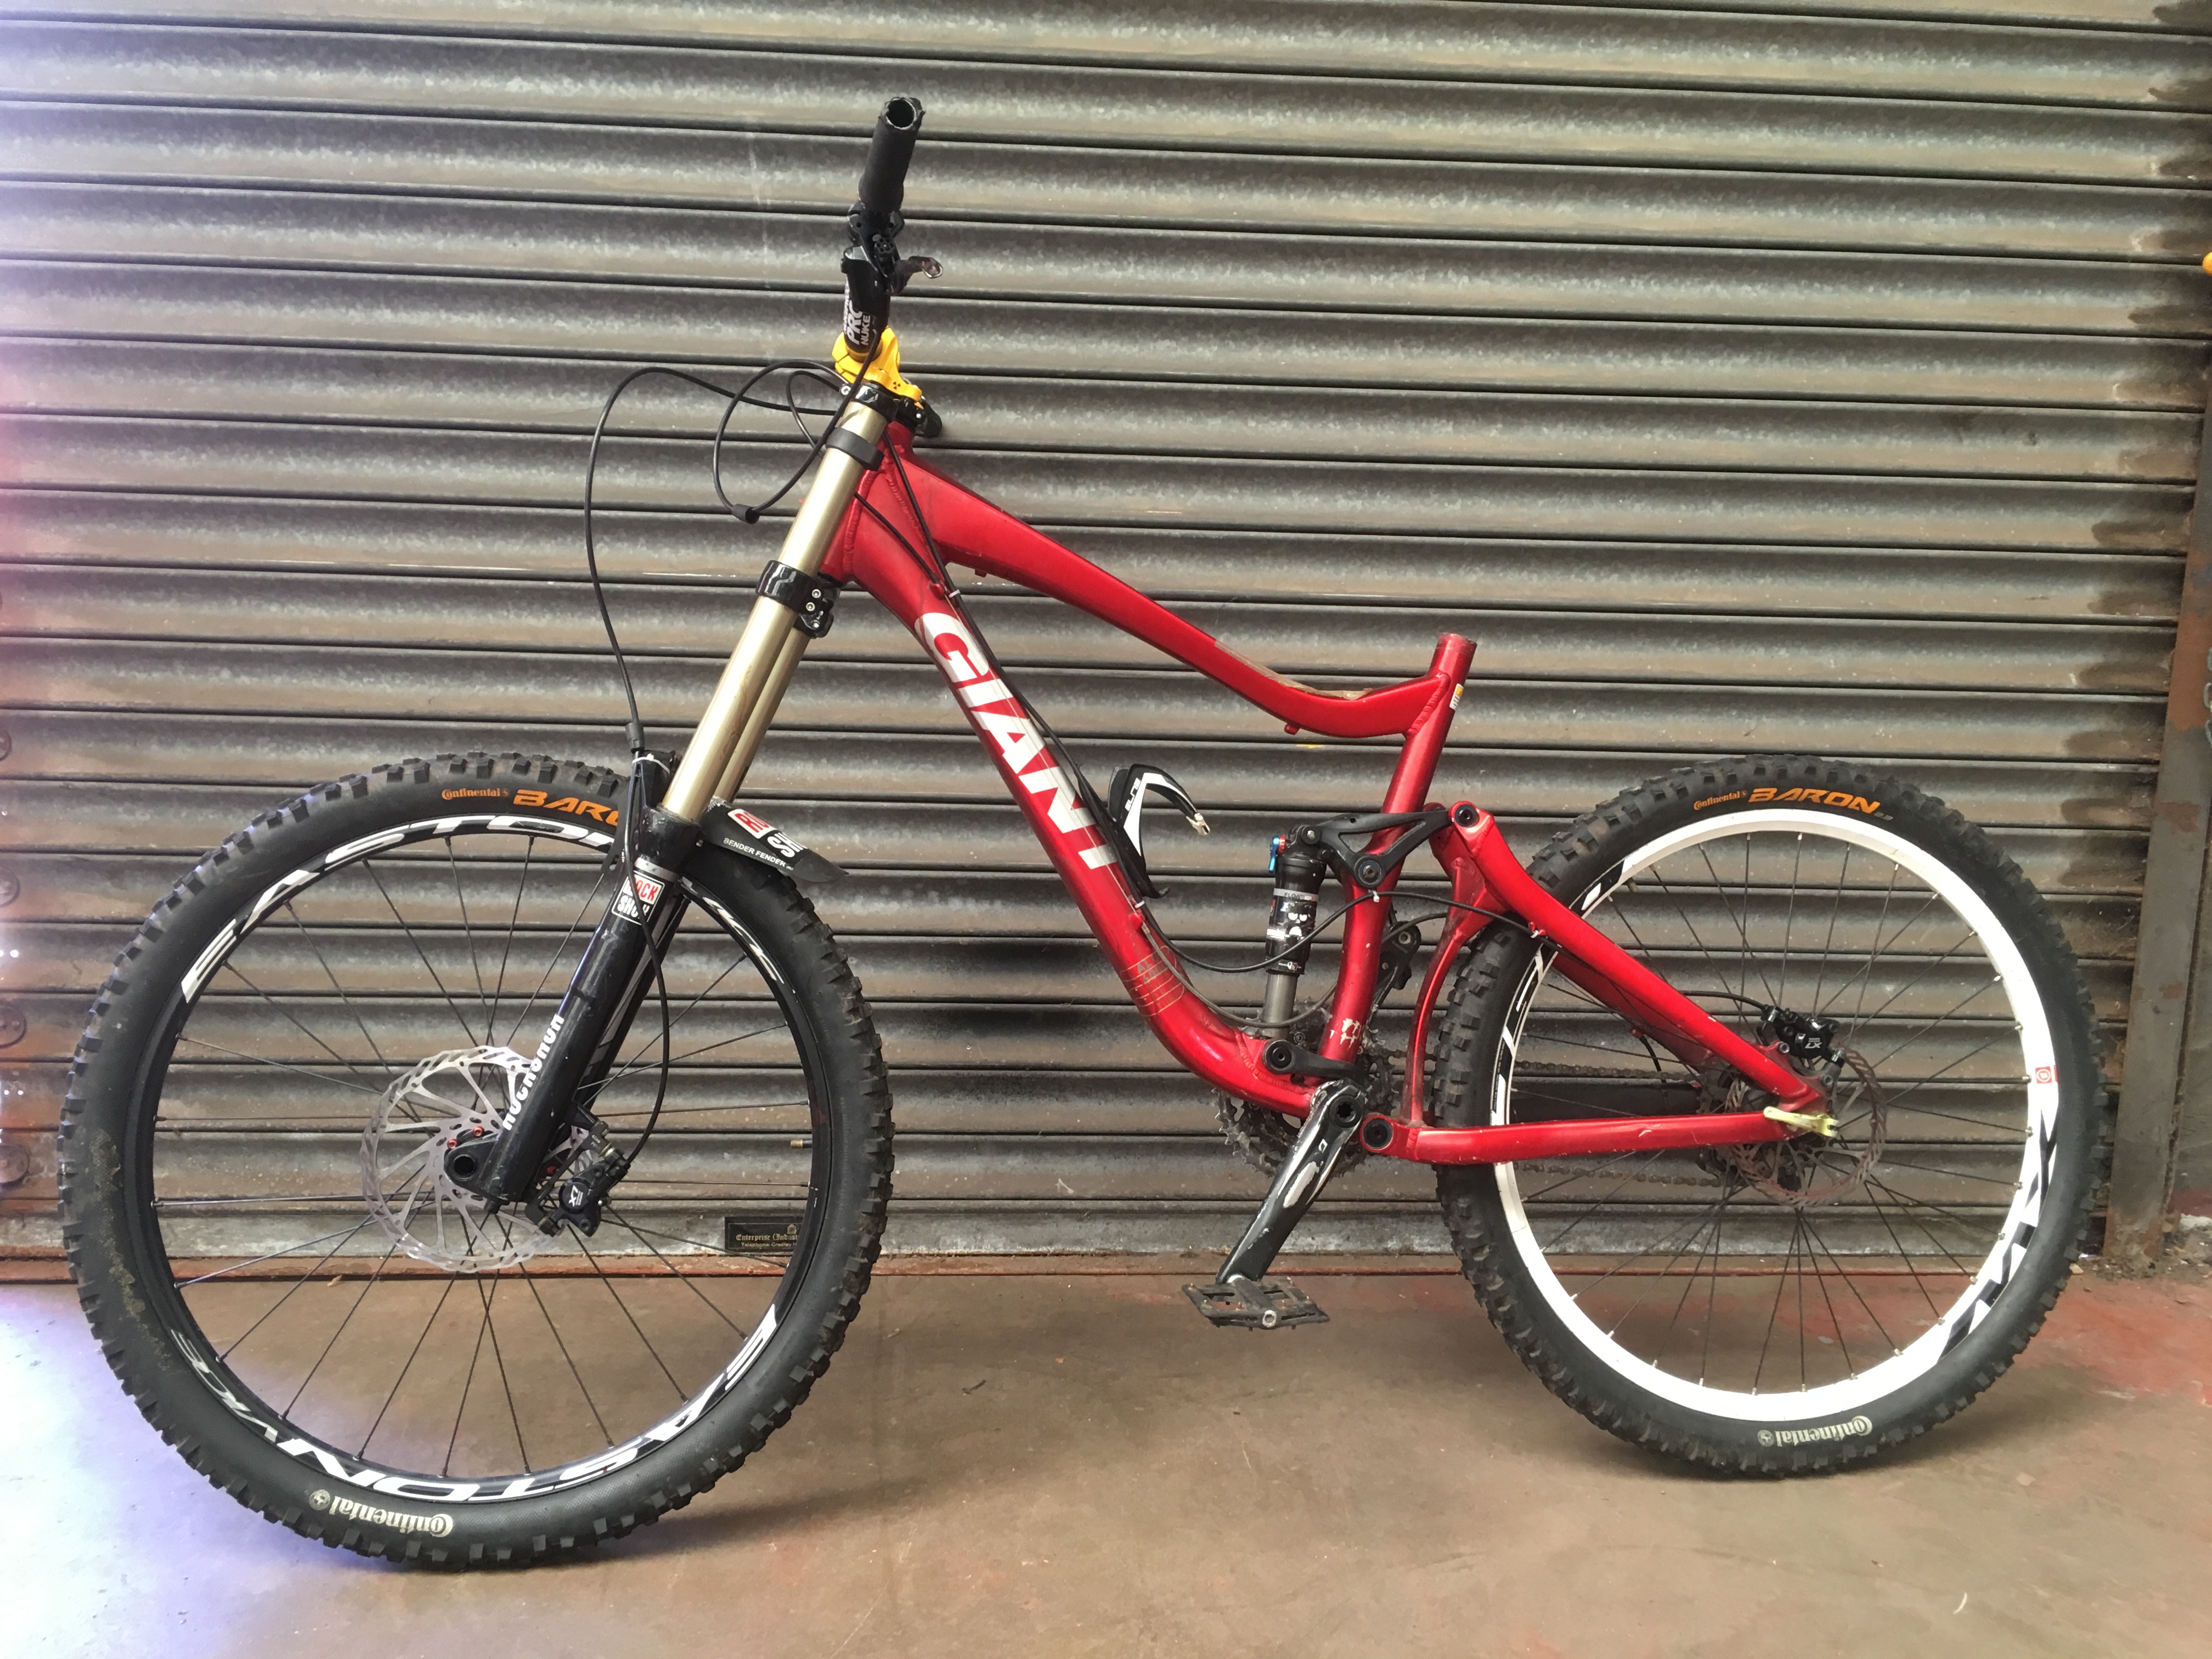 POLICE > Giant Reign Full Suspension mountain bike / bicycle [NO RESERVE] [VAT ON HAMMER PRICE]